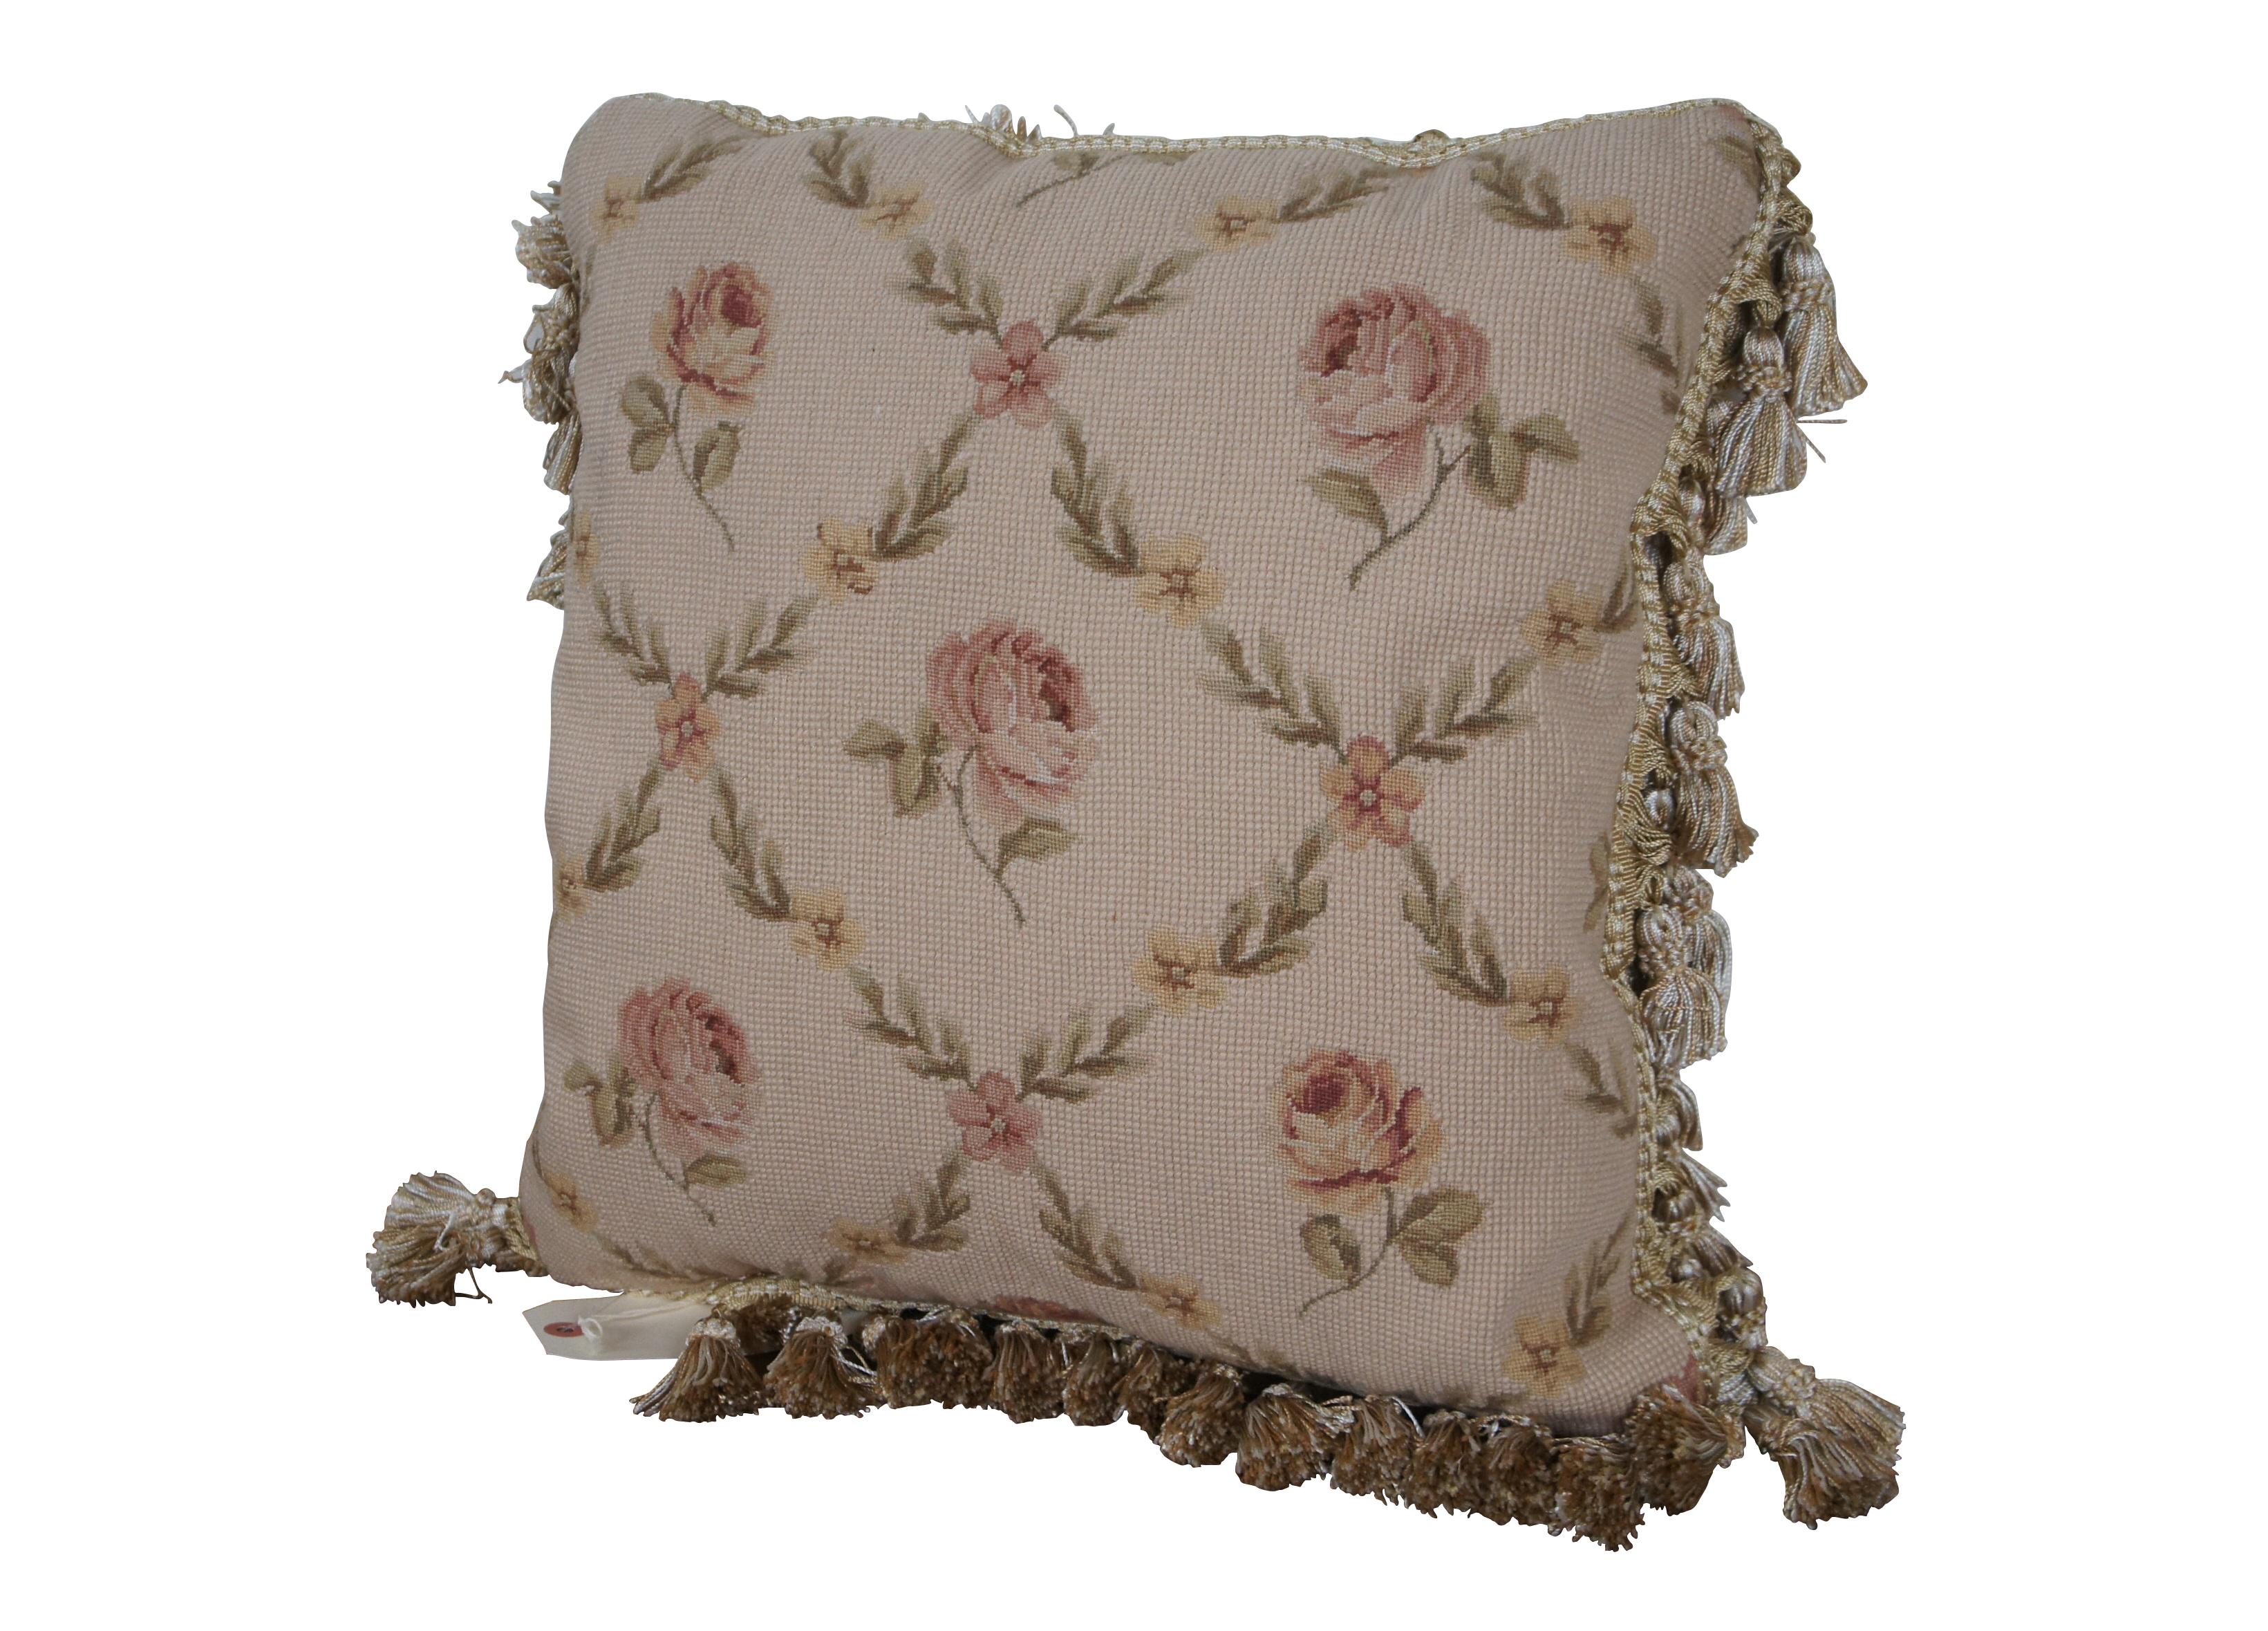 5 Available - 20th century square needlepoint throw pillow, hand embroidered with a pattern of pink roses, divided by criss crossing lines of pink and yellow flowers and leaves, on a beige background. Cream and gold tassel trim. Beige velour back